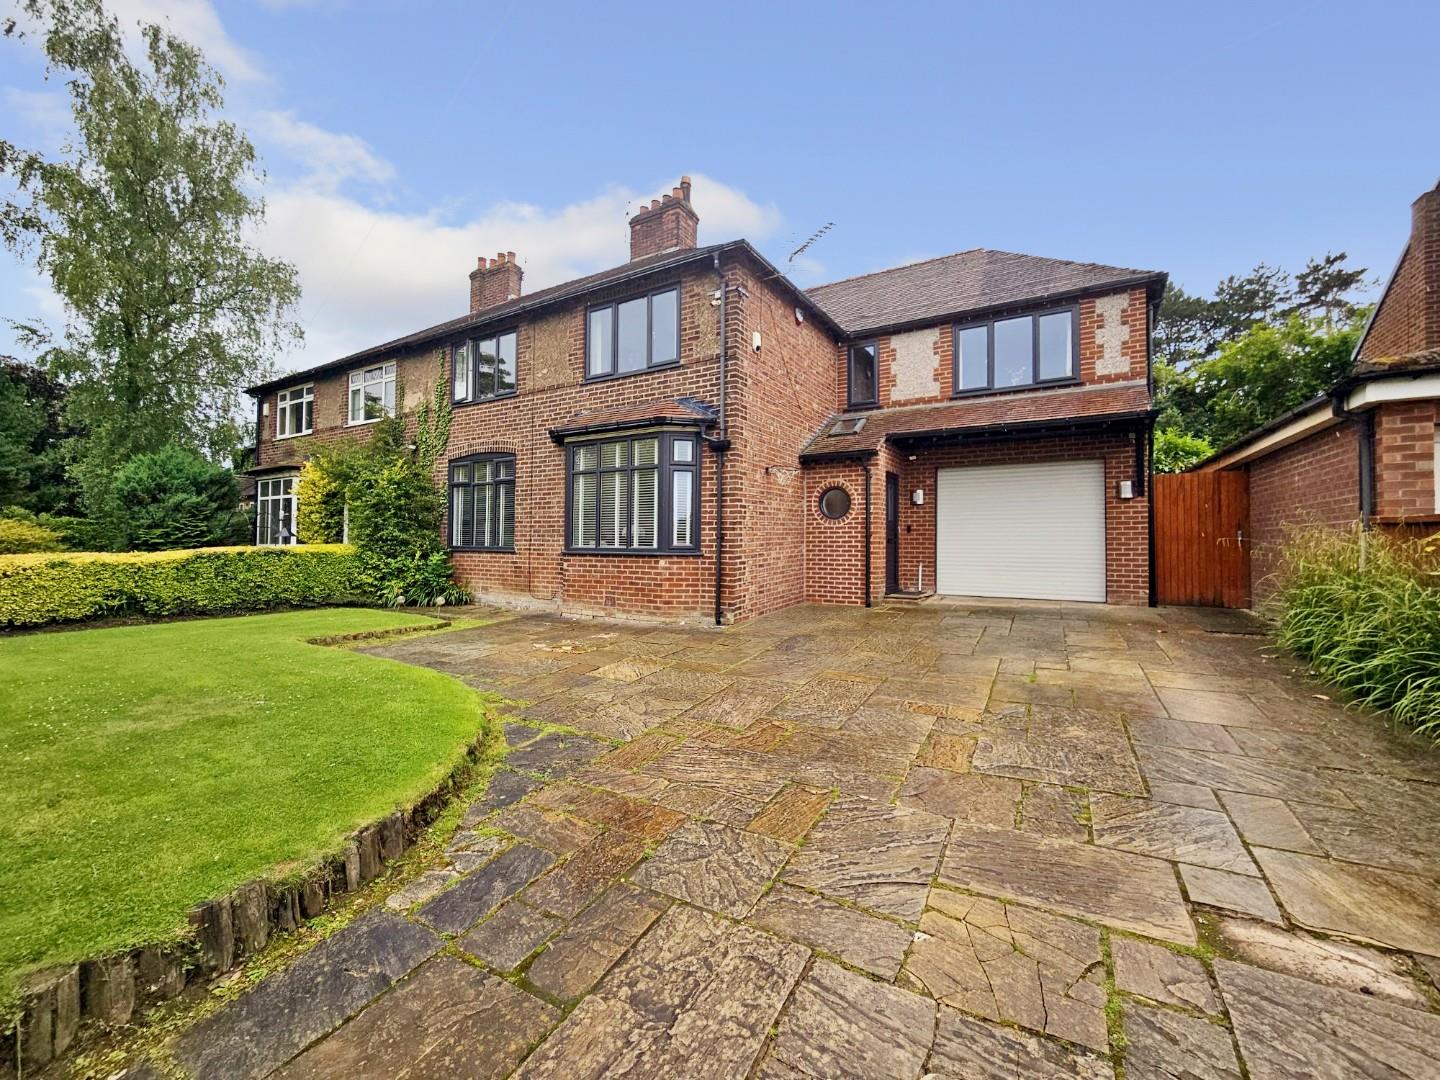 5 bed semi-detached house to rent in Ash Lane, Altrincham - Property Image 1